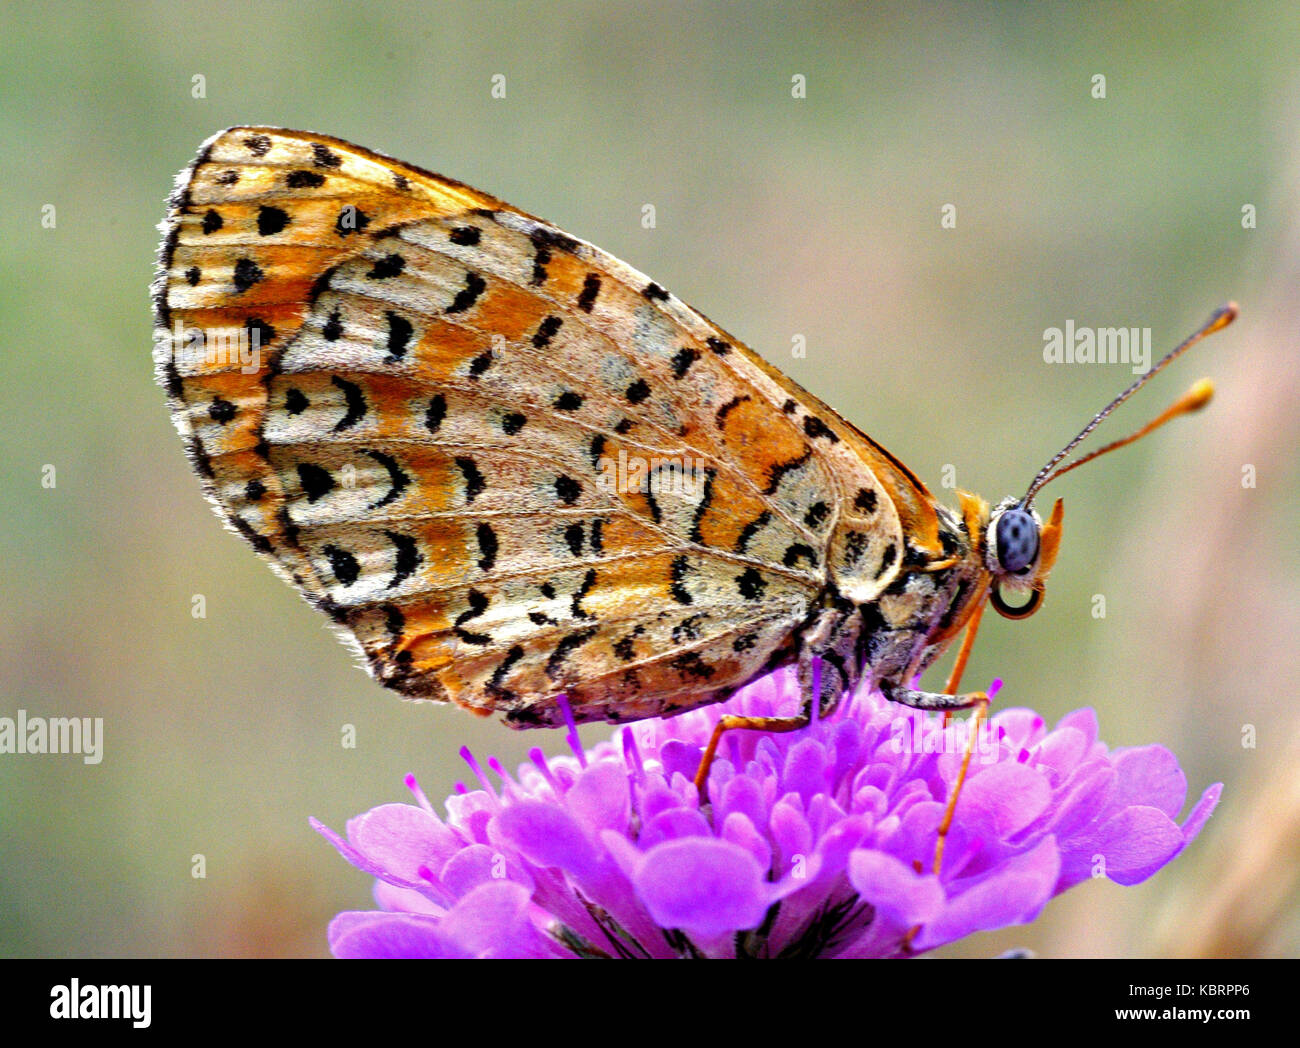 the butterfly Melitaea phoebe, the Knapweed fritillary, from the family Nymphphalidae Stock Photo